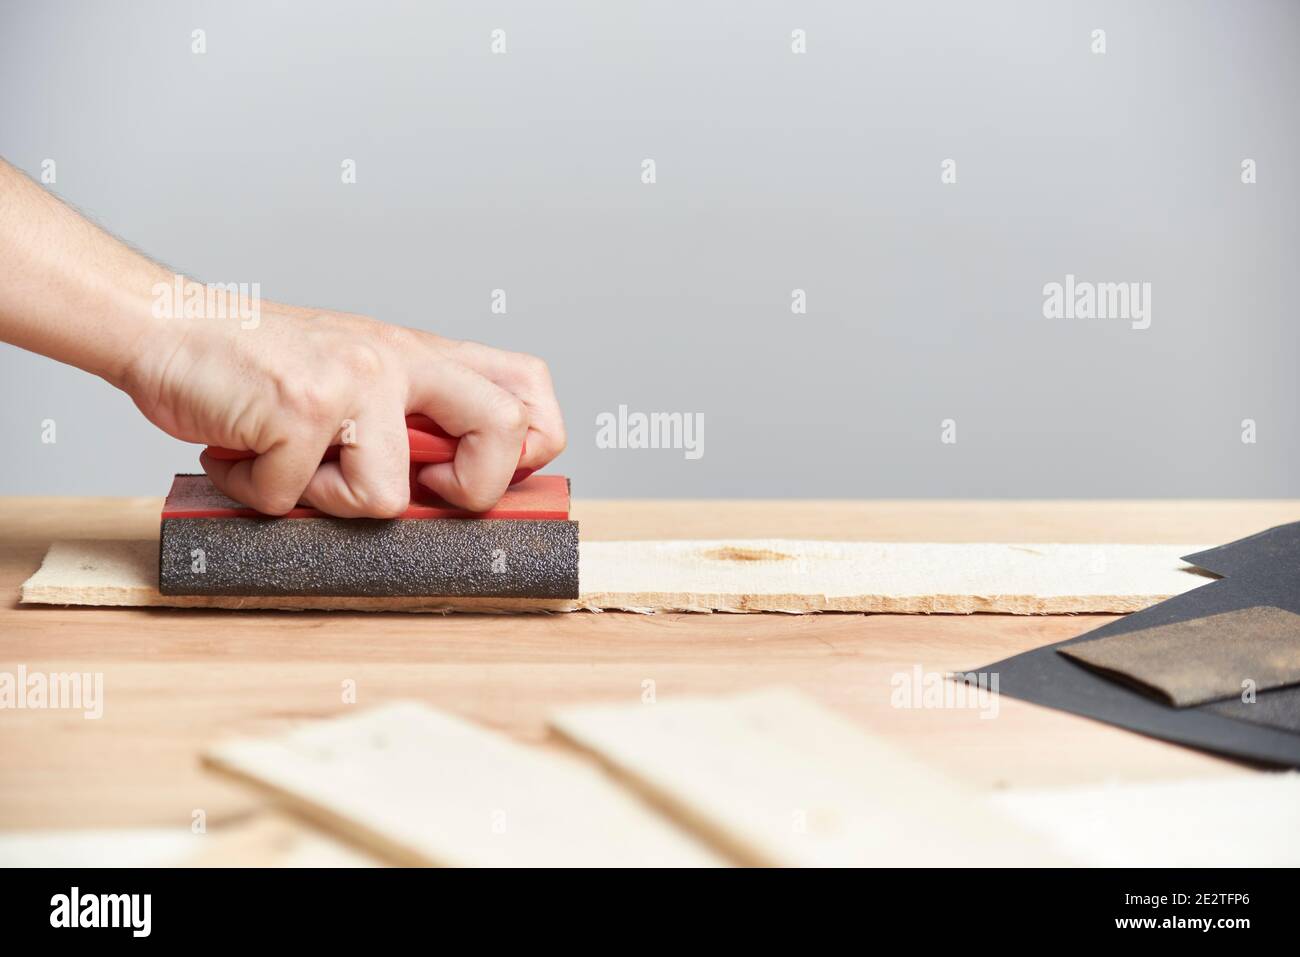 Detail of carpentry. Hand of a young woman sanding wood with sandpaper. Image with copy space. Stock Photo